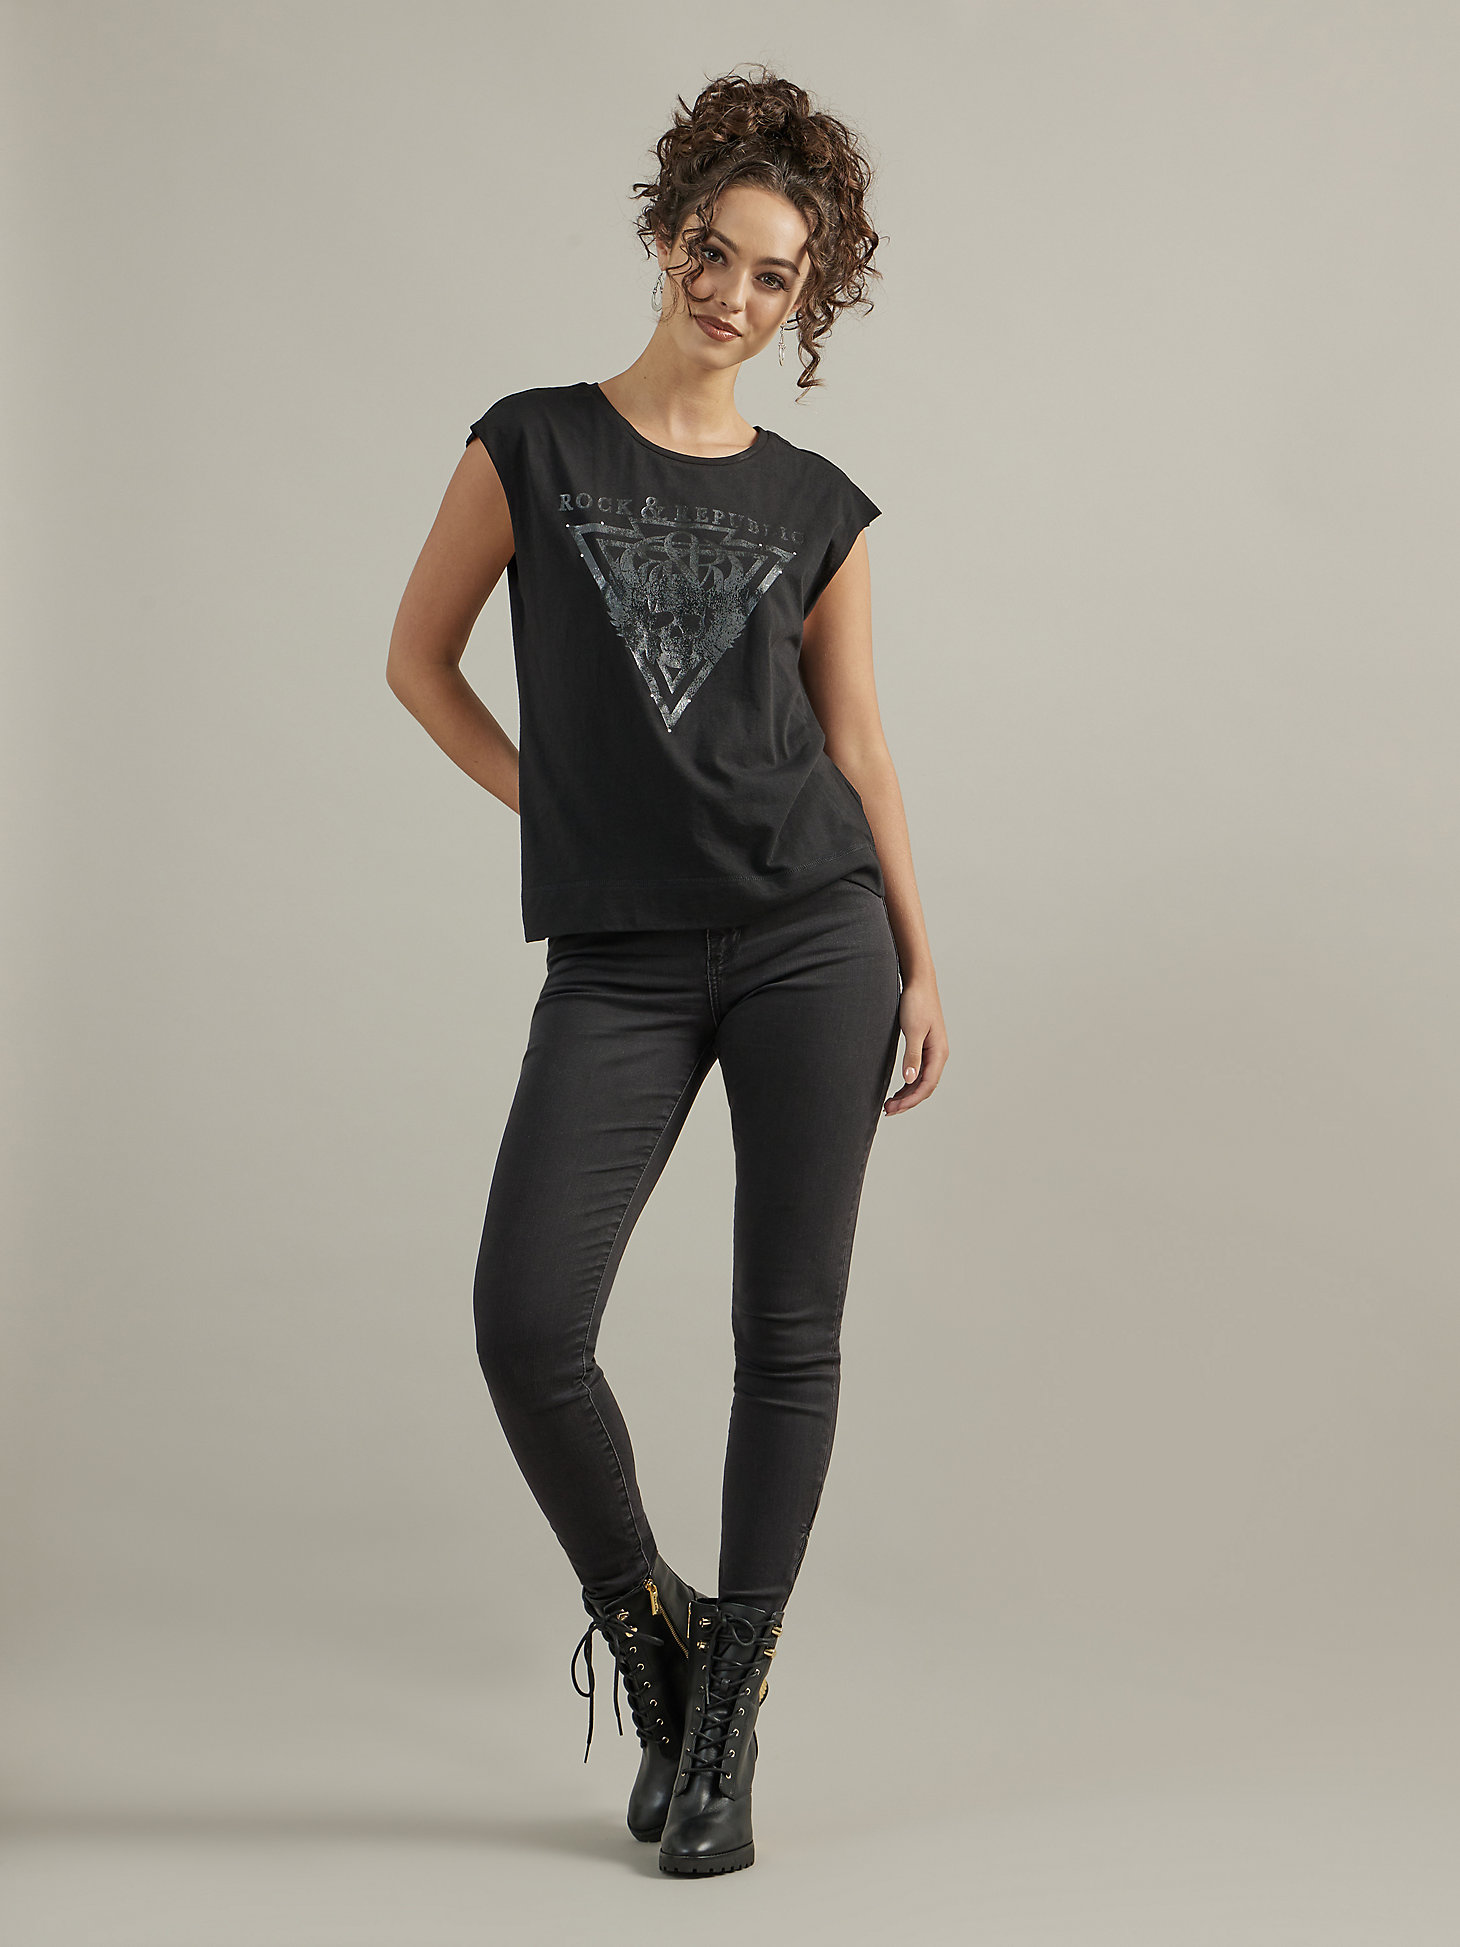 Short Sleeve Tonal Skull Graphic Muscle Tee in Black main view